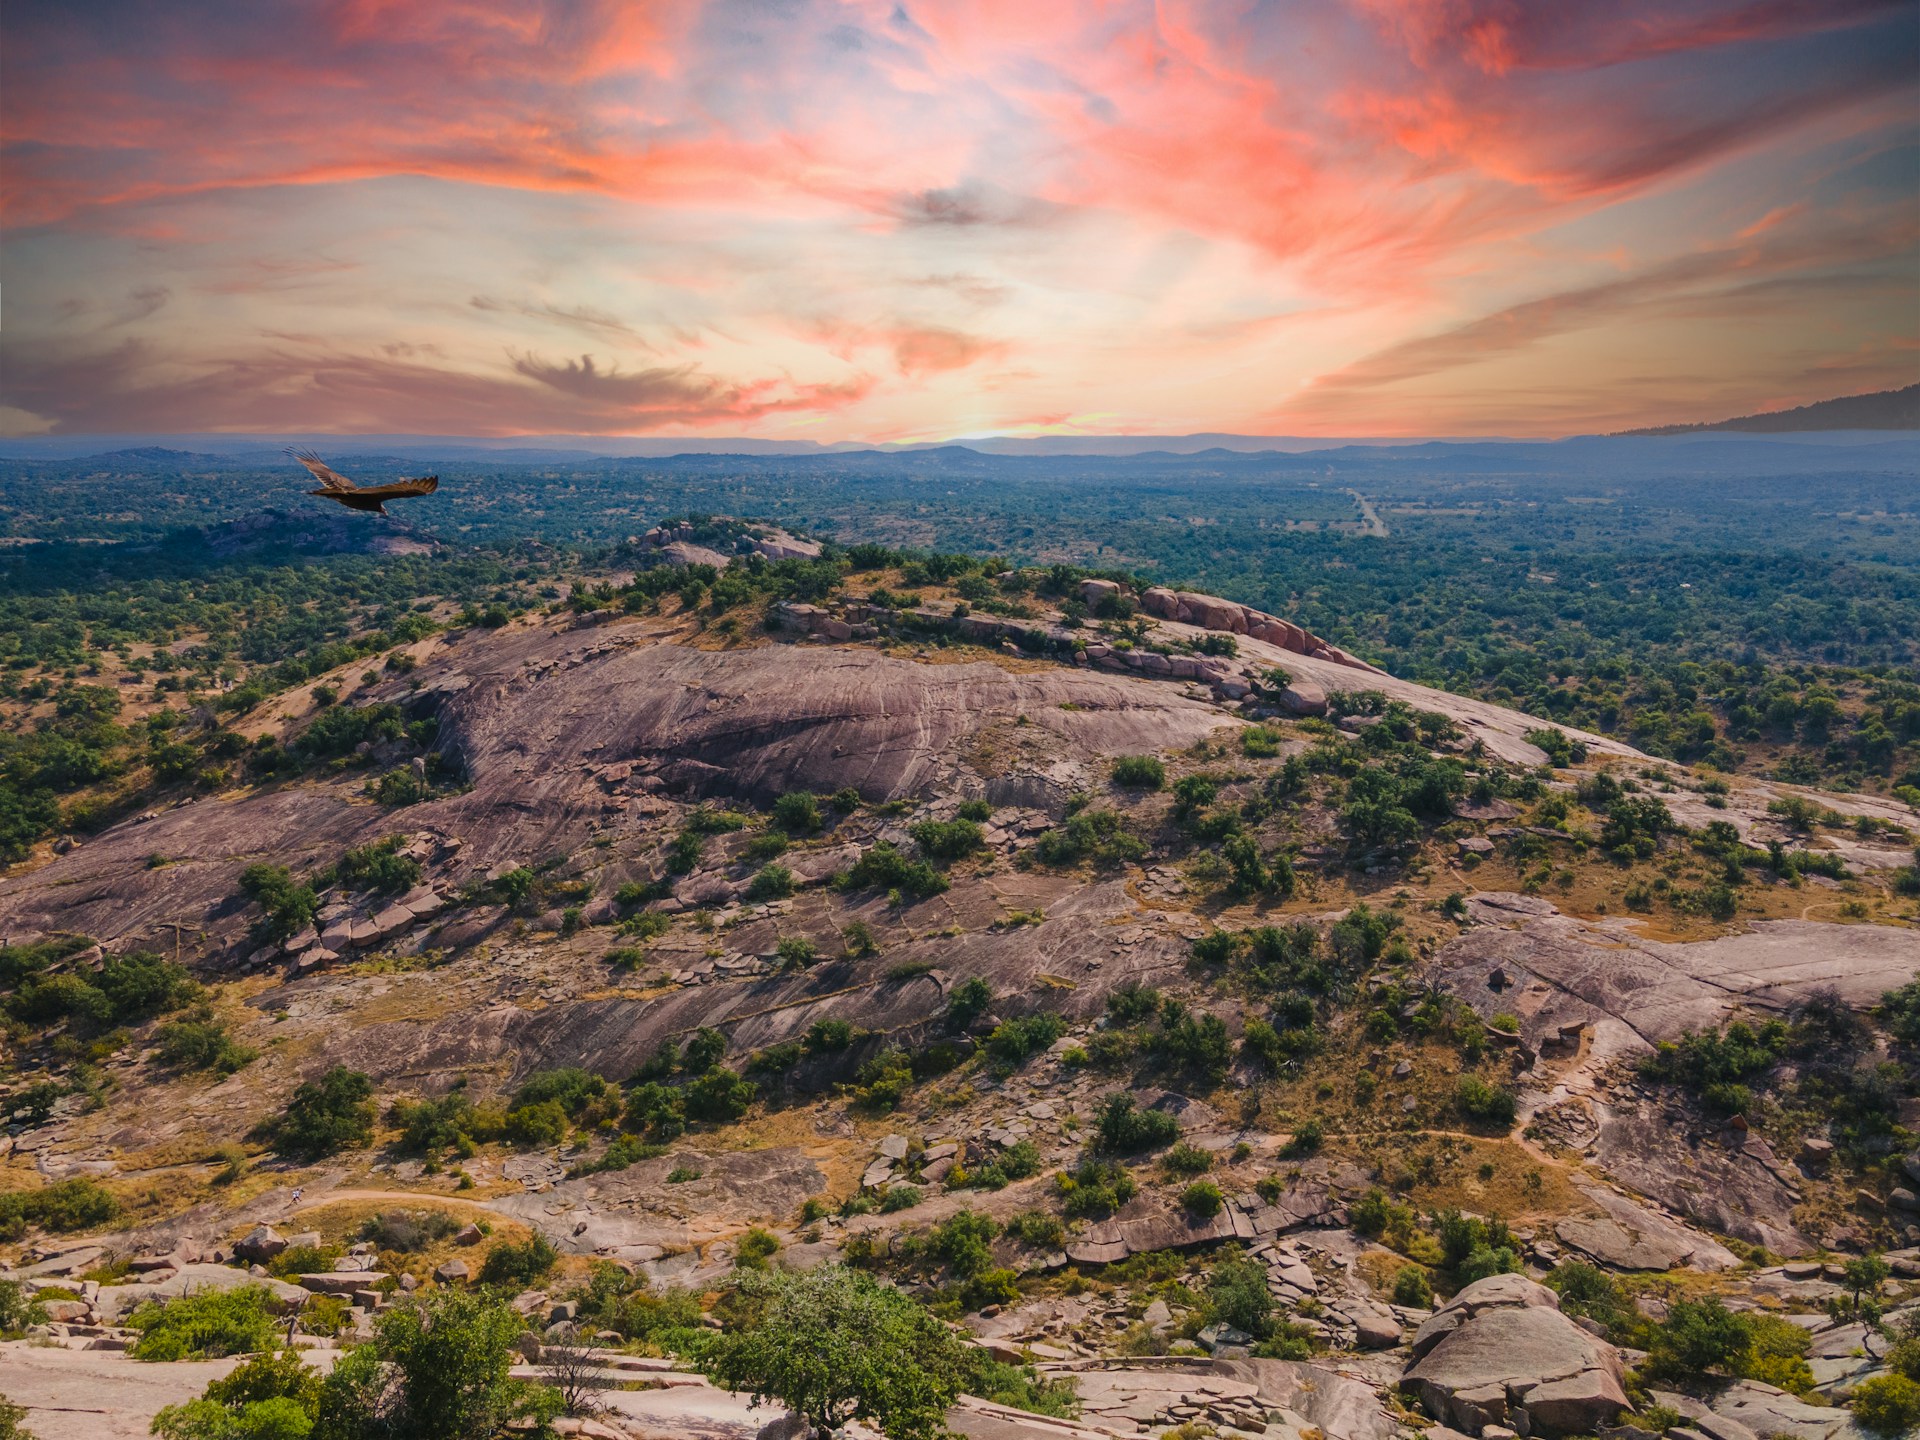 Hiking Enchanted Rock offers a families a way to spend time outdoors while on vacation in Fredericksburg (photo: J. Amill Santiago).